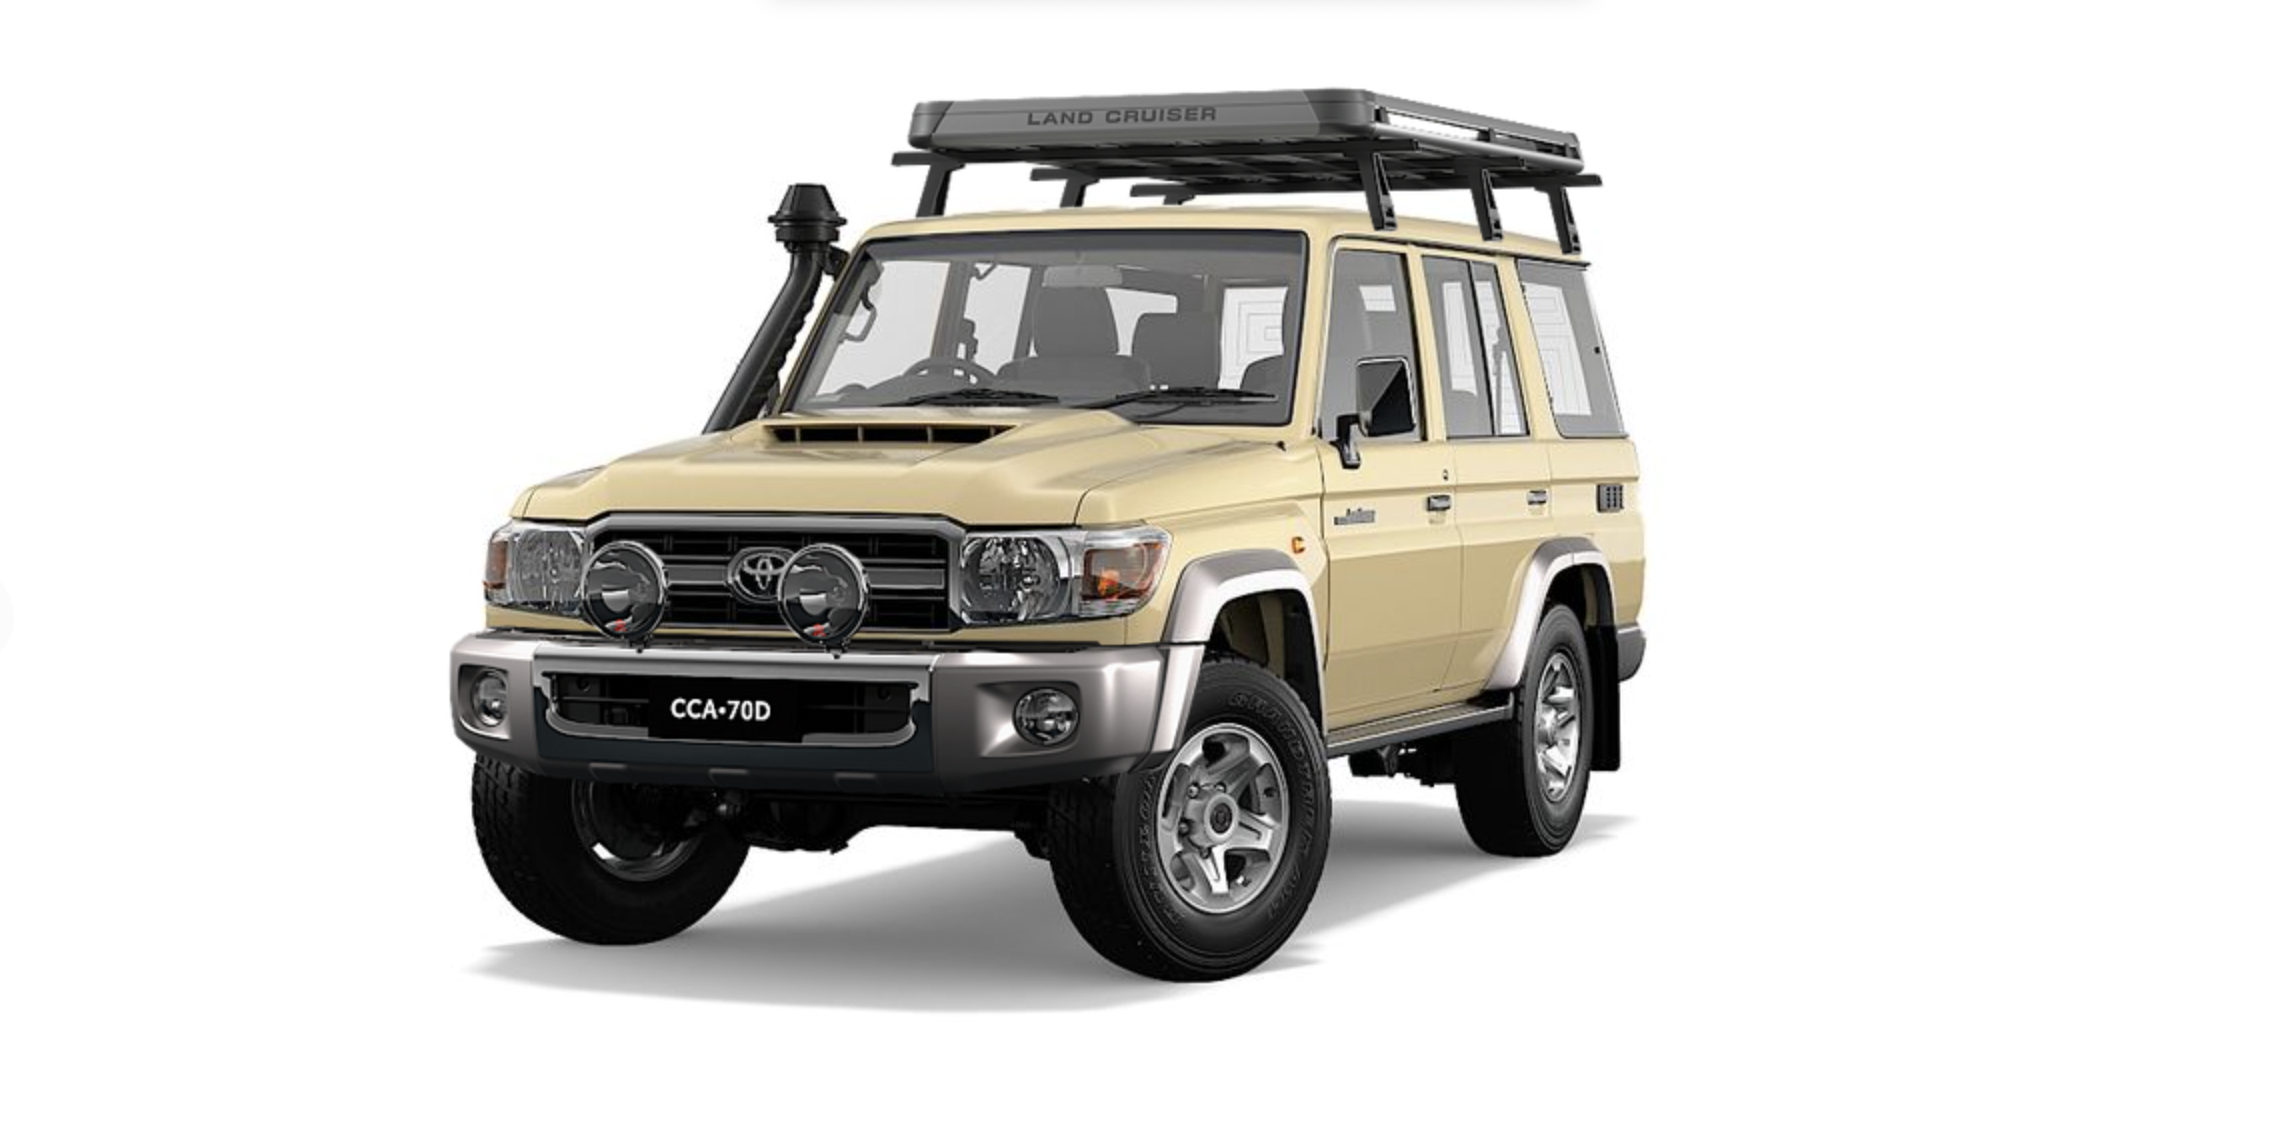 Toyota rendering of a brown 70 Land Cruiser sold in Australia.